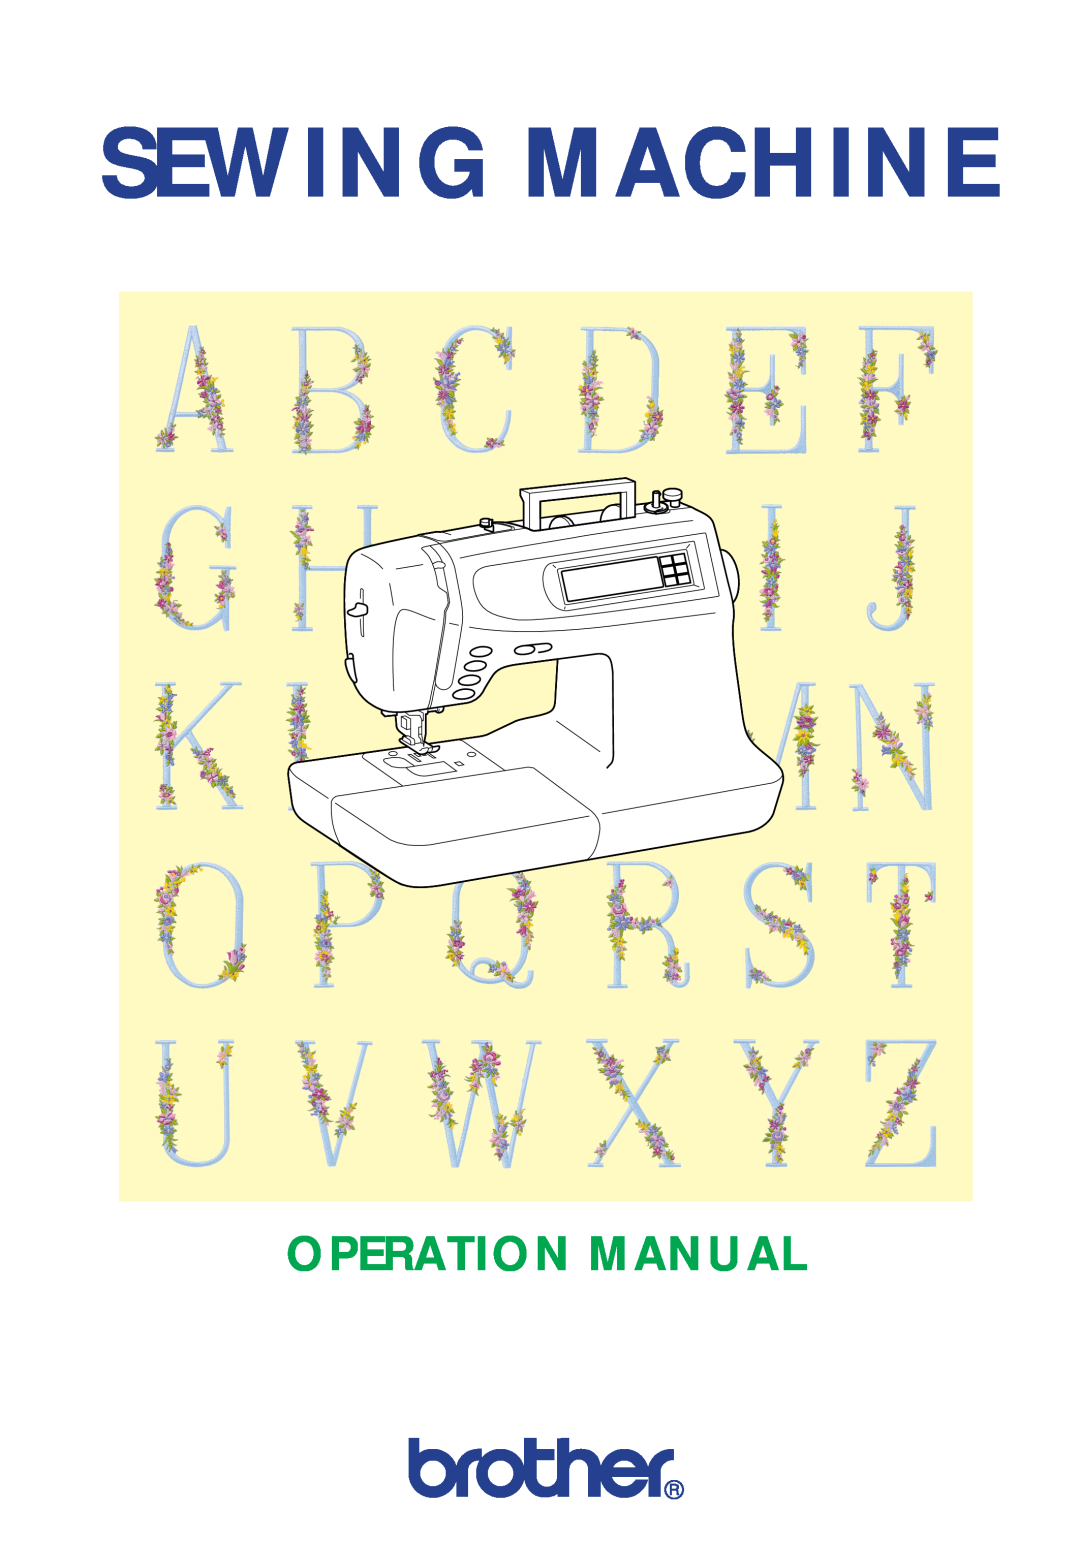 Brother PC 6500 operation manual Sewing Machine, Operation Manual 